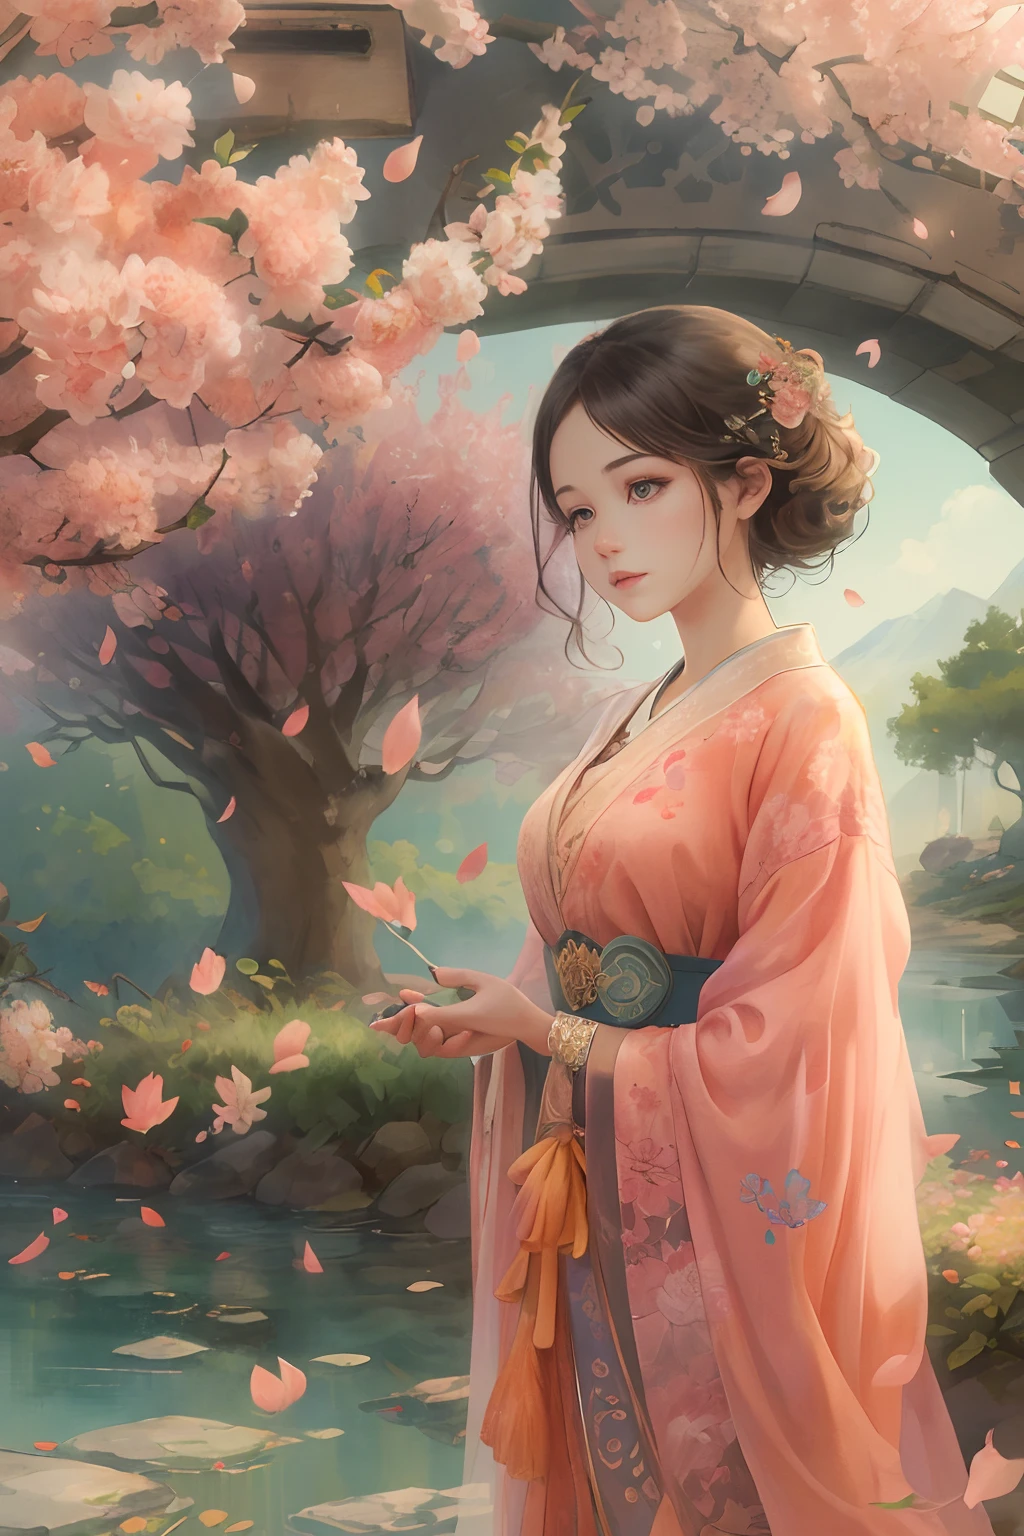 A girl standing in a beautiful garden, Surrounded by vibrant peach blossoms and peach petals floating in the air. The scenery is picturesque, A tranquil river flows beside the winding road. The girl has charming and delicate eyes. Her lips are also beautiful, Adds to her elegant appearance。。The artwork is of the highest quality, The resolution is 8K, Provides ultra-detailed and realistic depictions. The colors are vivid and vibrant, Add depth and life to your images. The overall style of the illustration is reminiscent of a masterpiece, Showcase intricate details and craftsmanship. The lighting in the scene is soft and soft, creating a warm and inviting atmosphere.